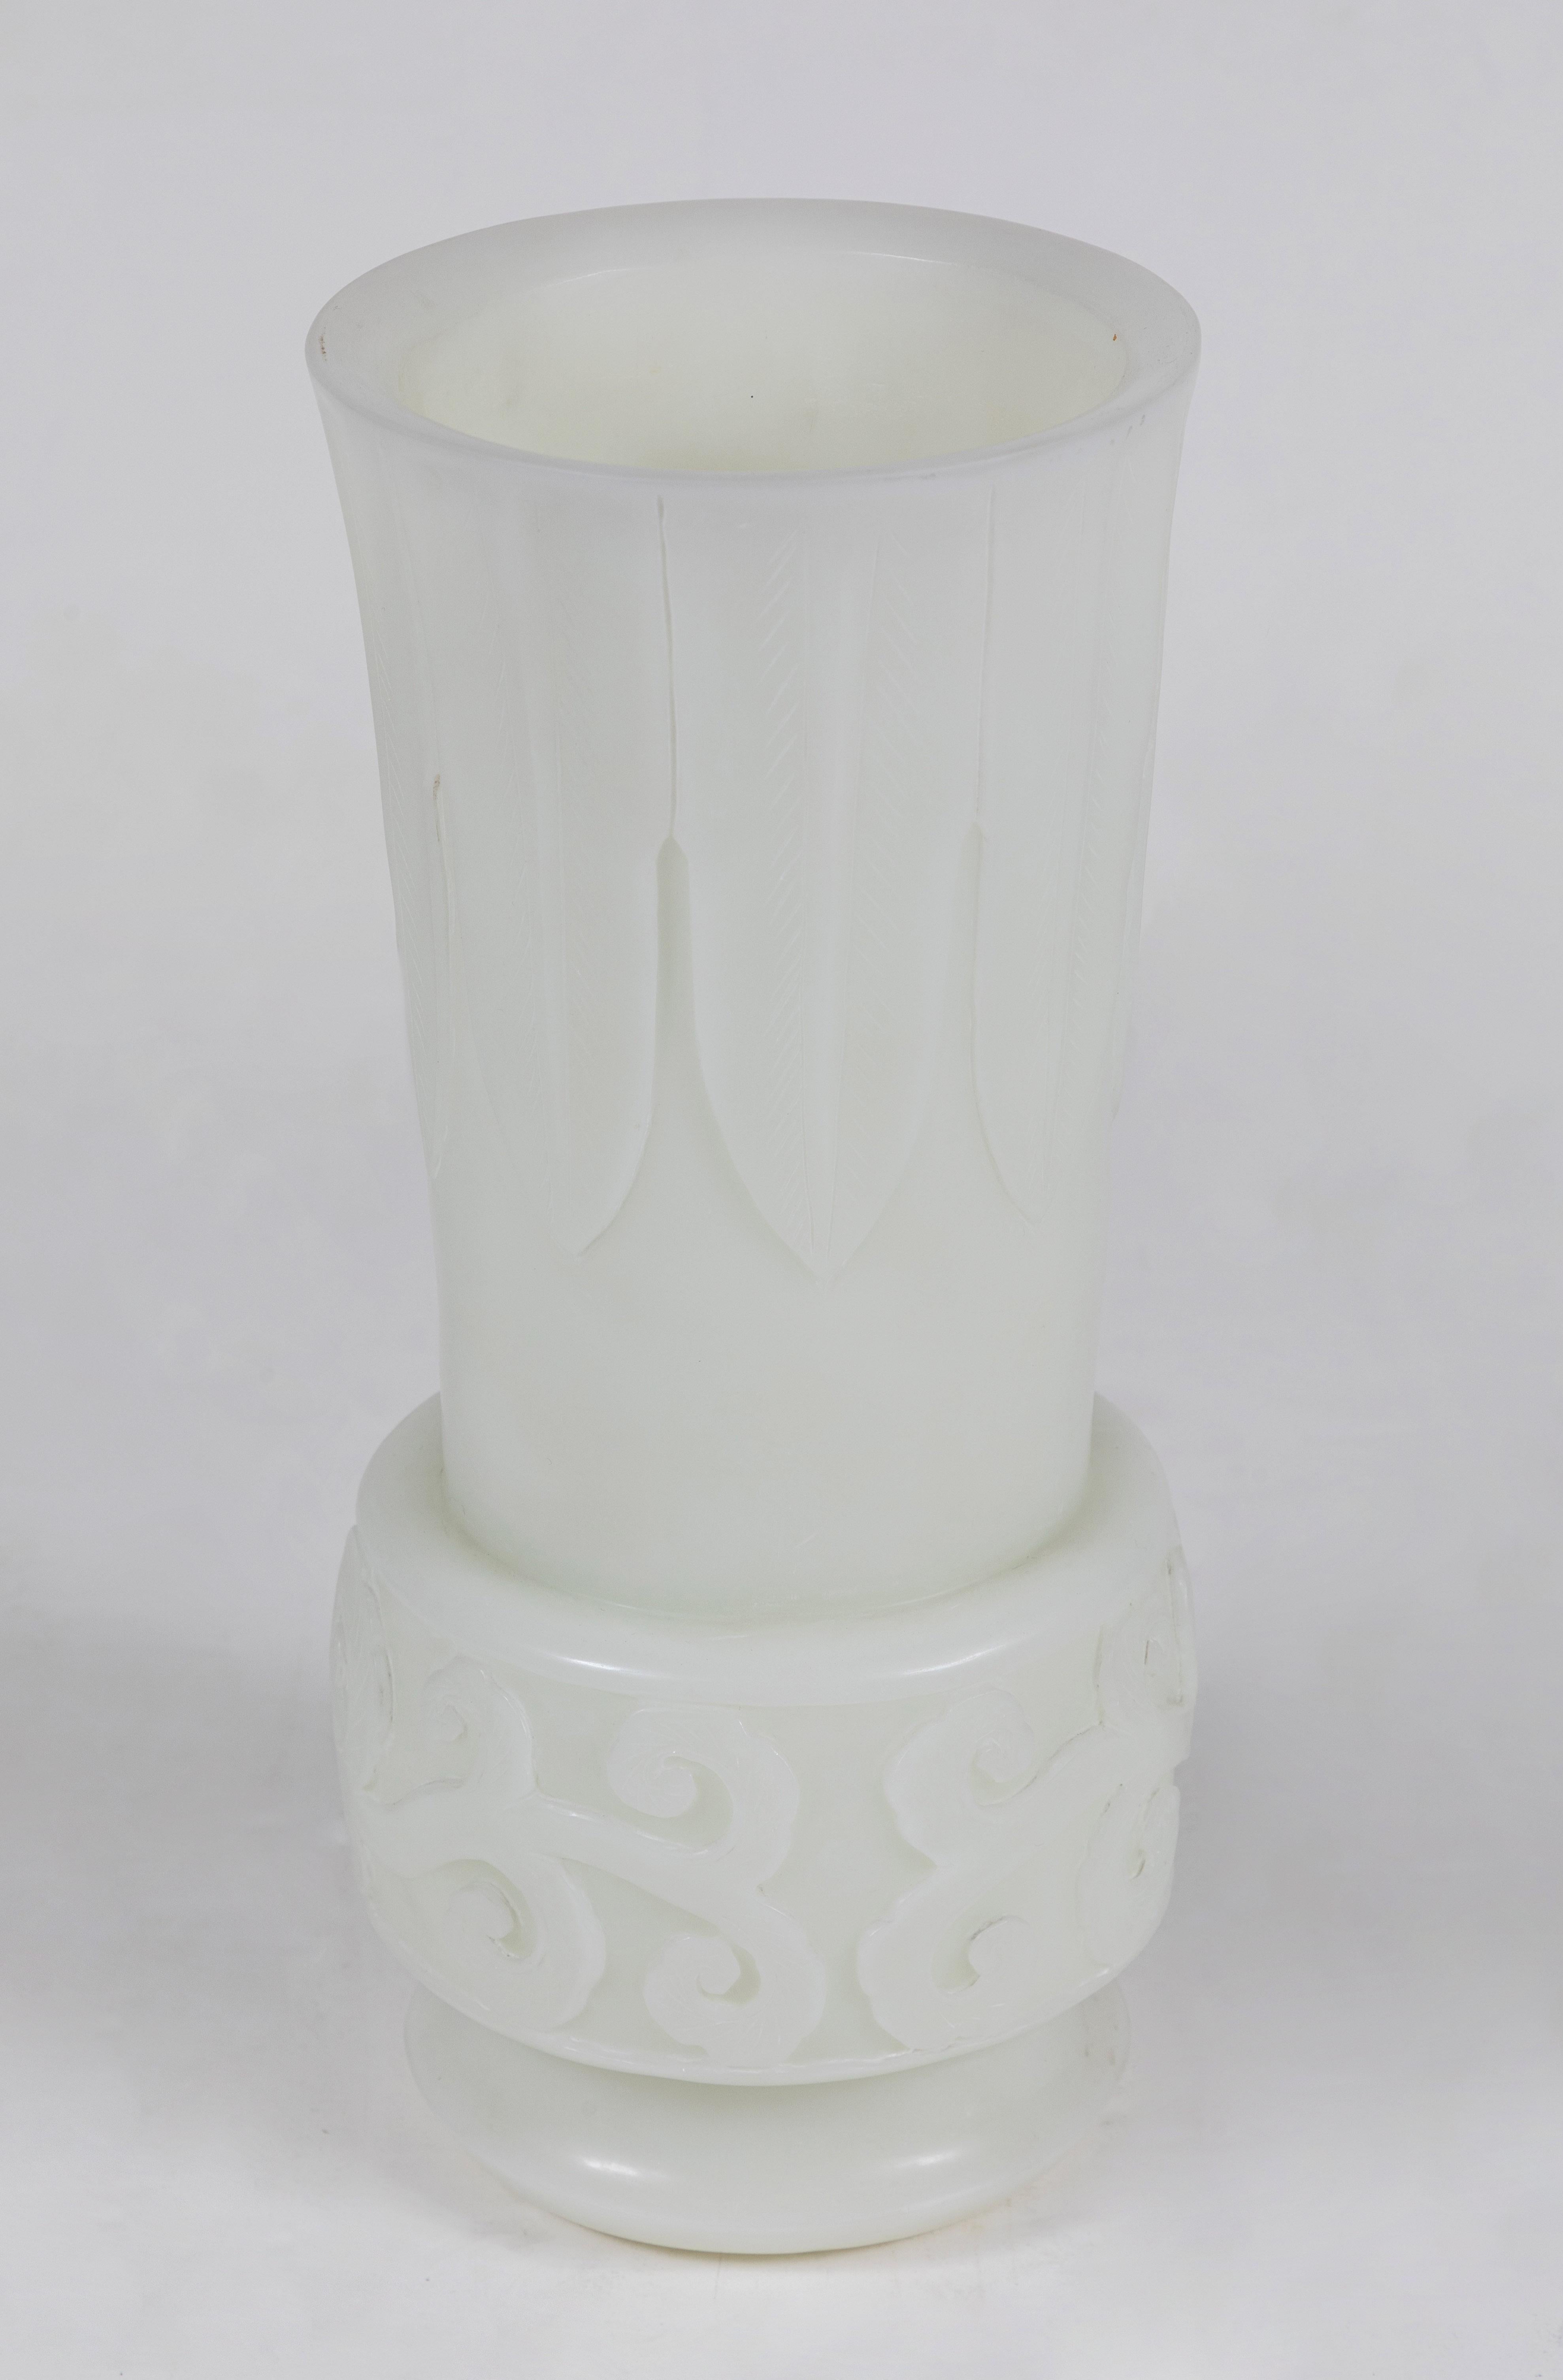 A beautiful pair of hard-to-find, Republic Period, 1930s, white Peking glass urns with foliate details throughout.